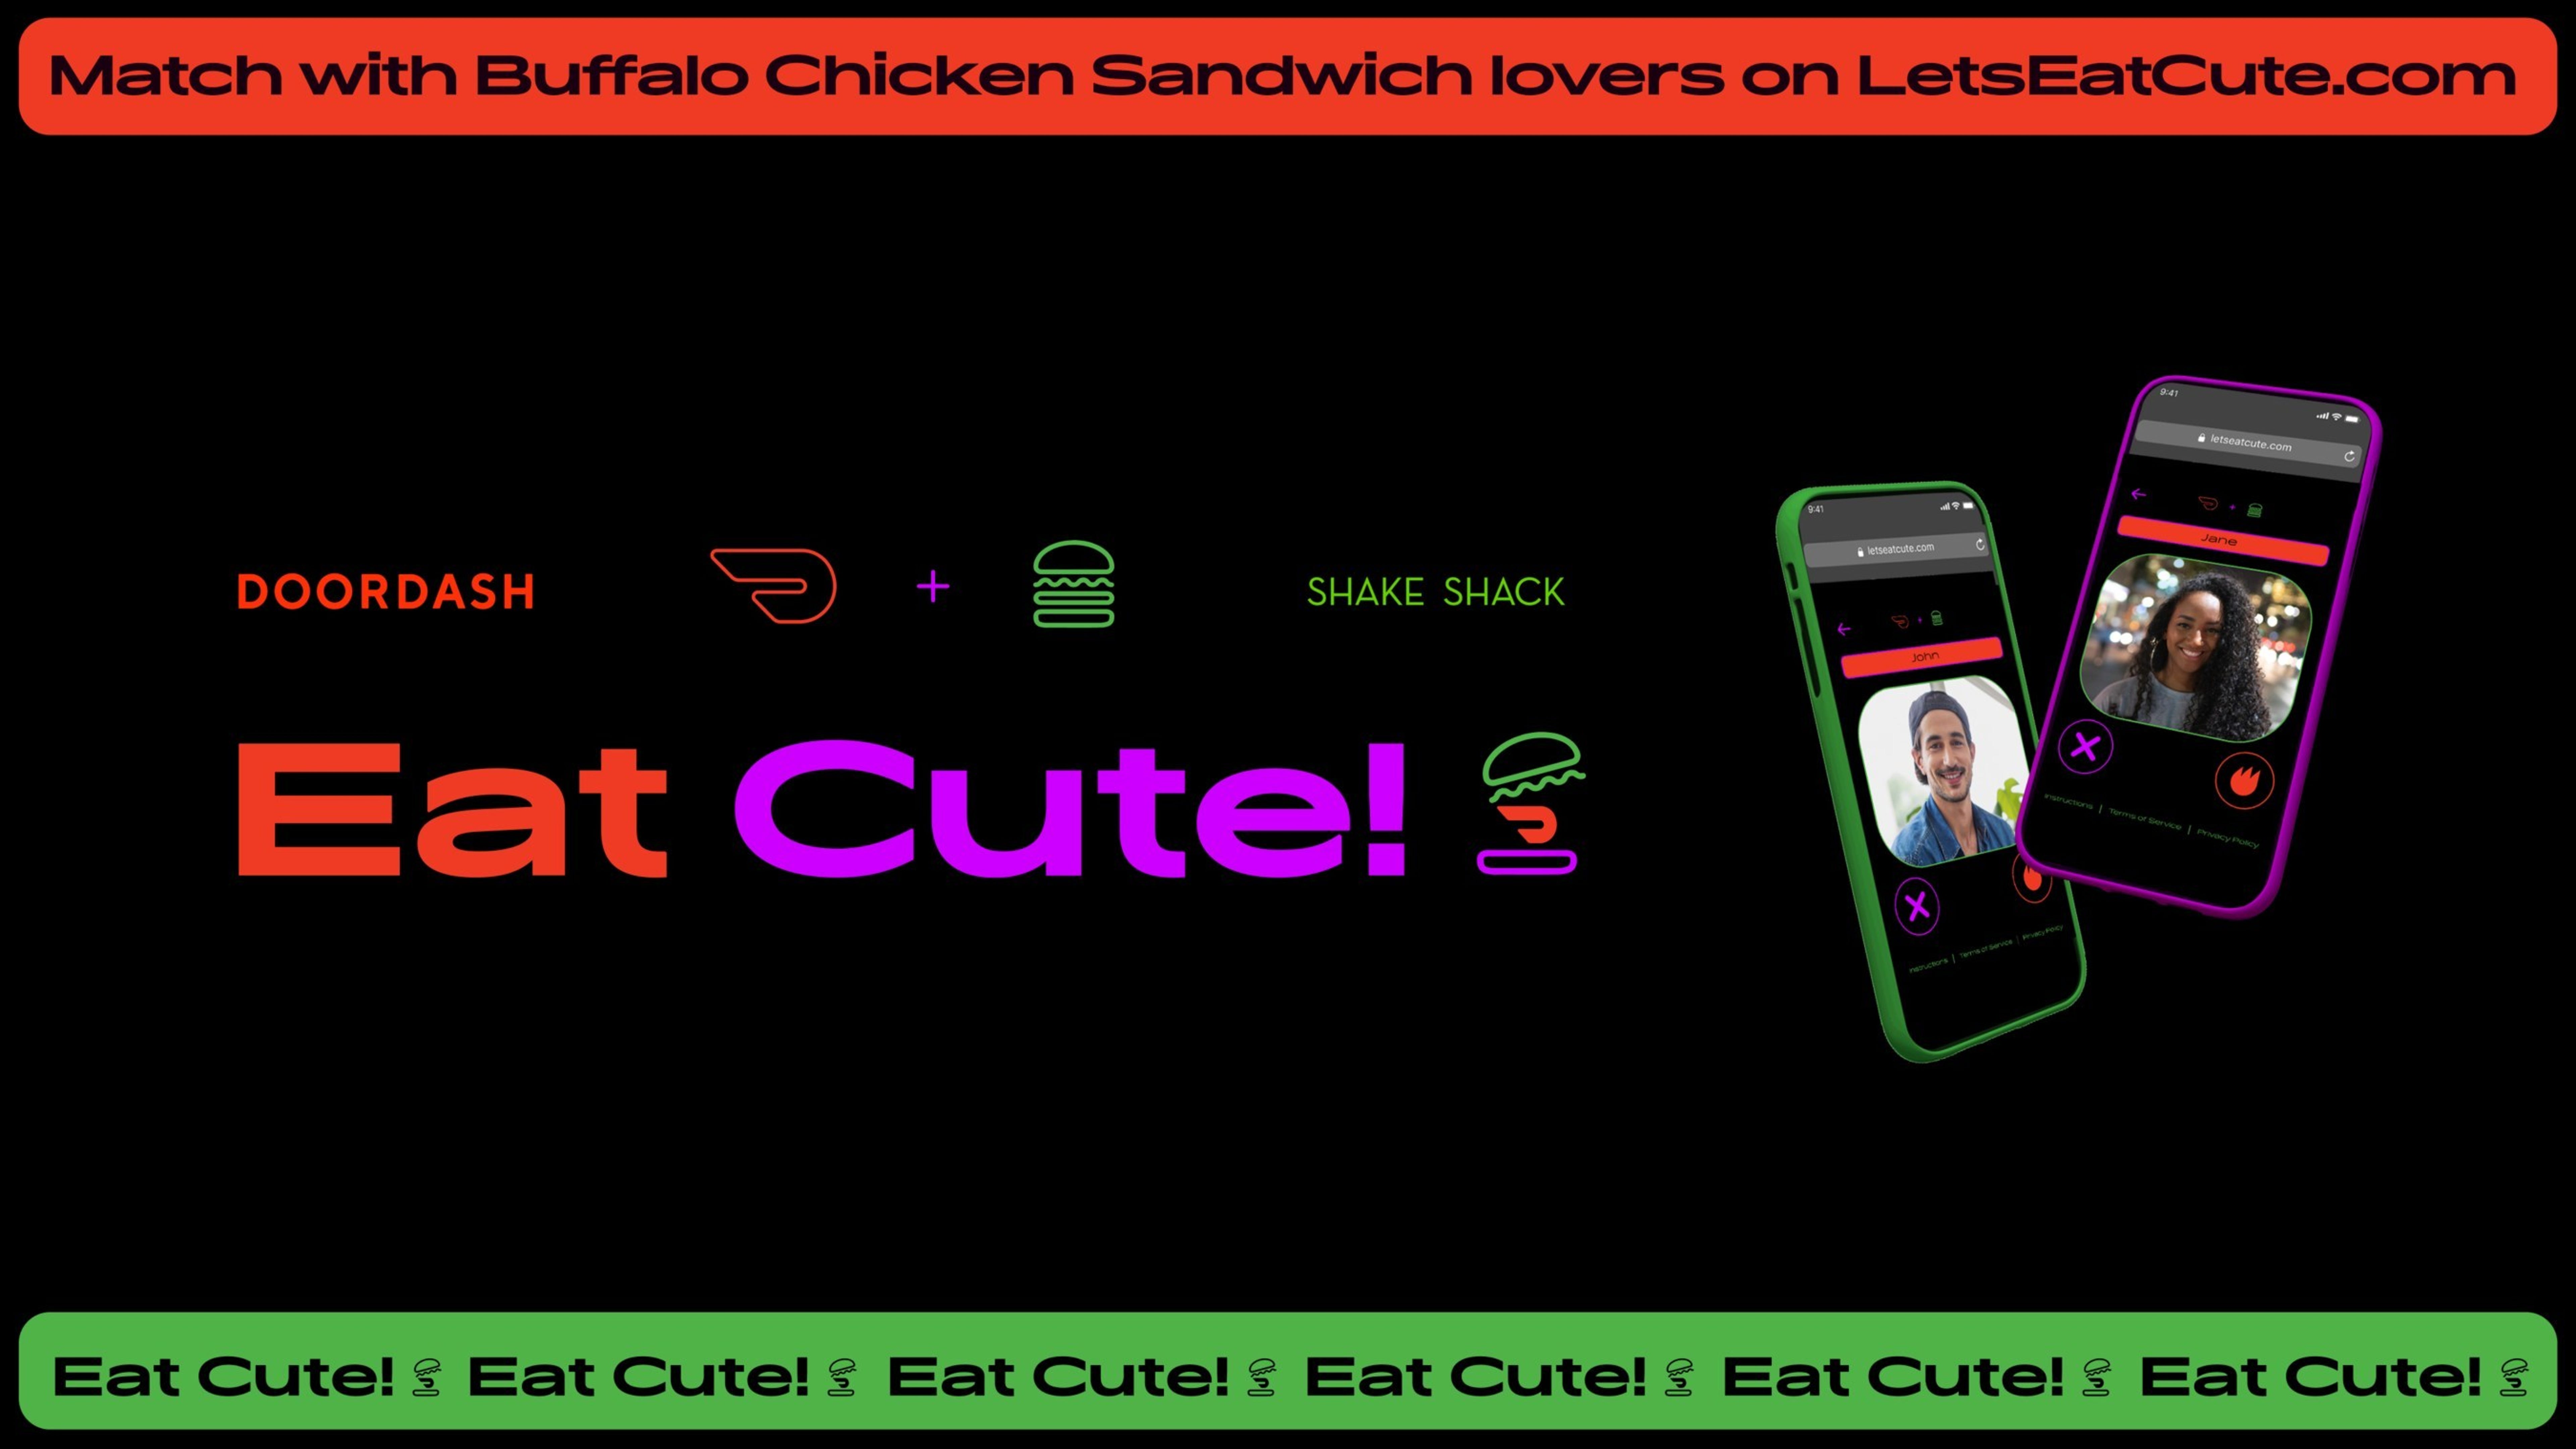 Door Dash And Shake Shack Launch Dating Site For Chicken Sandwich-Focused Lovers